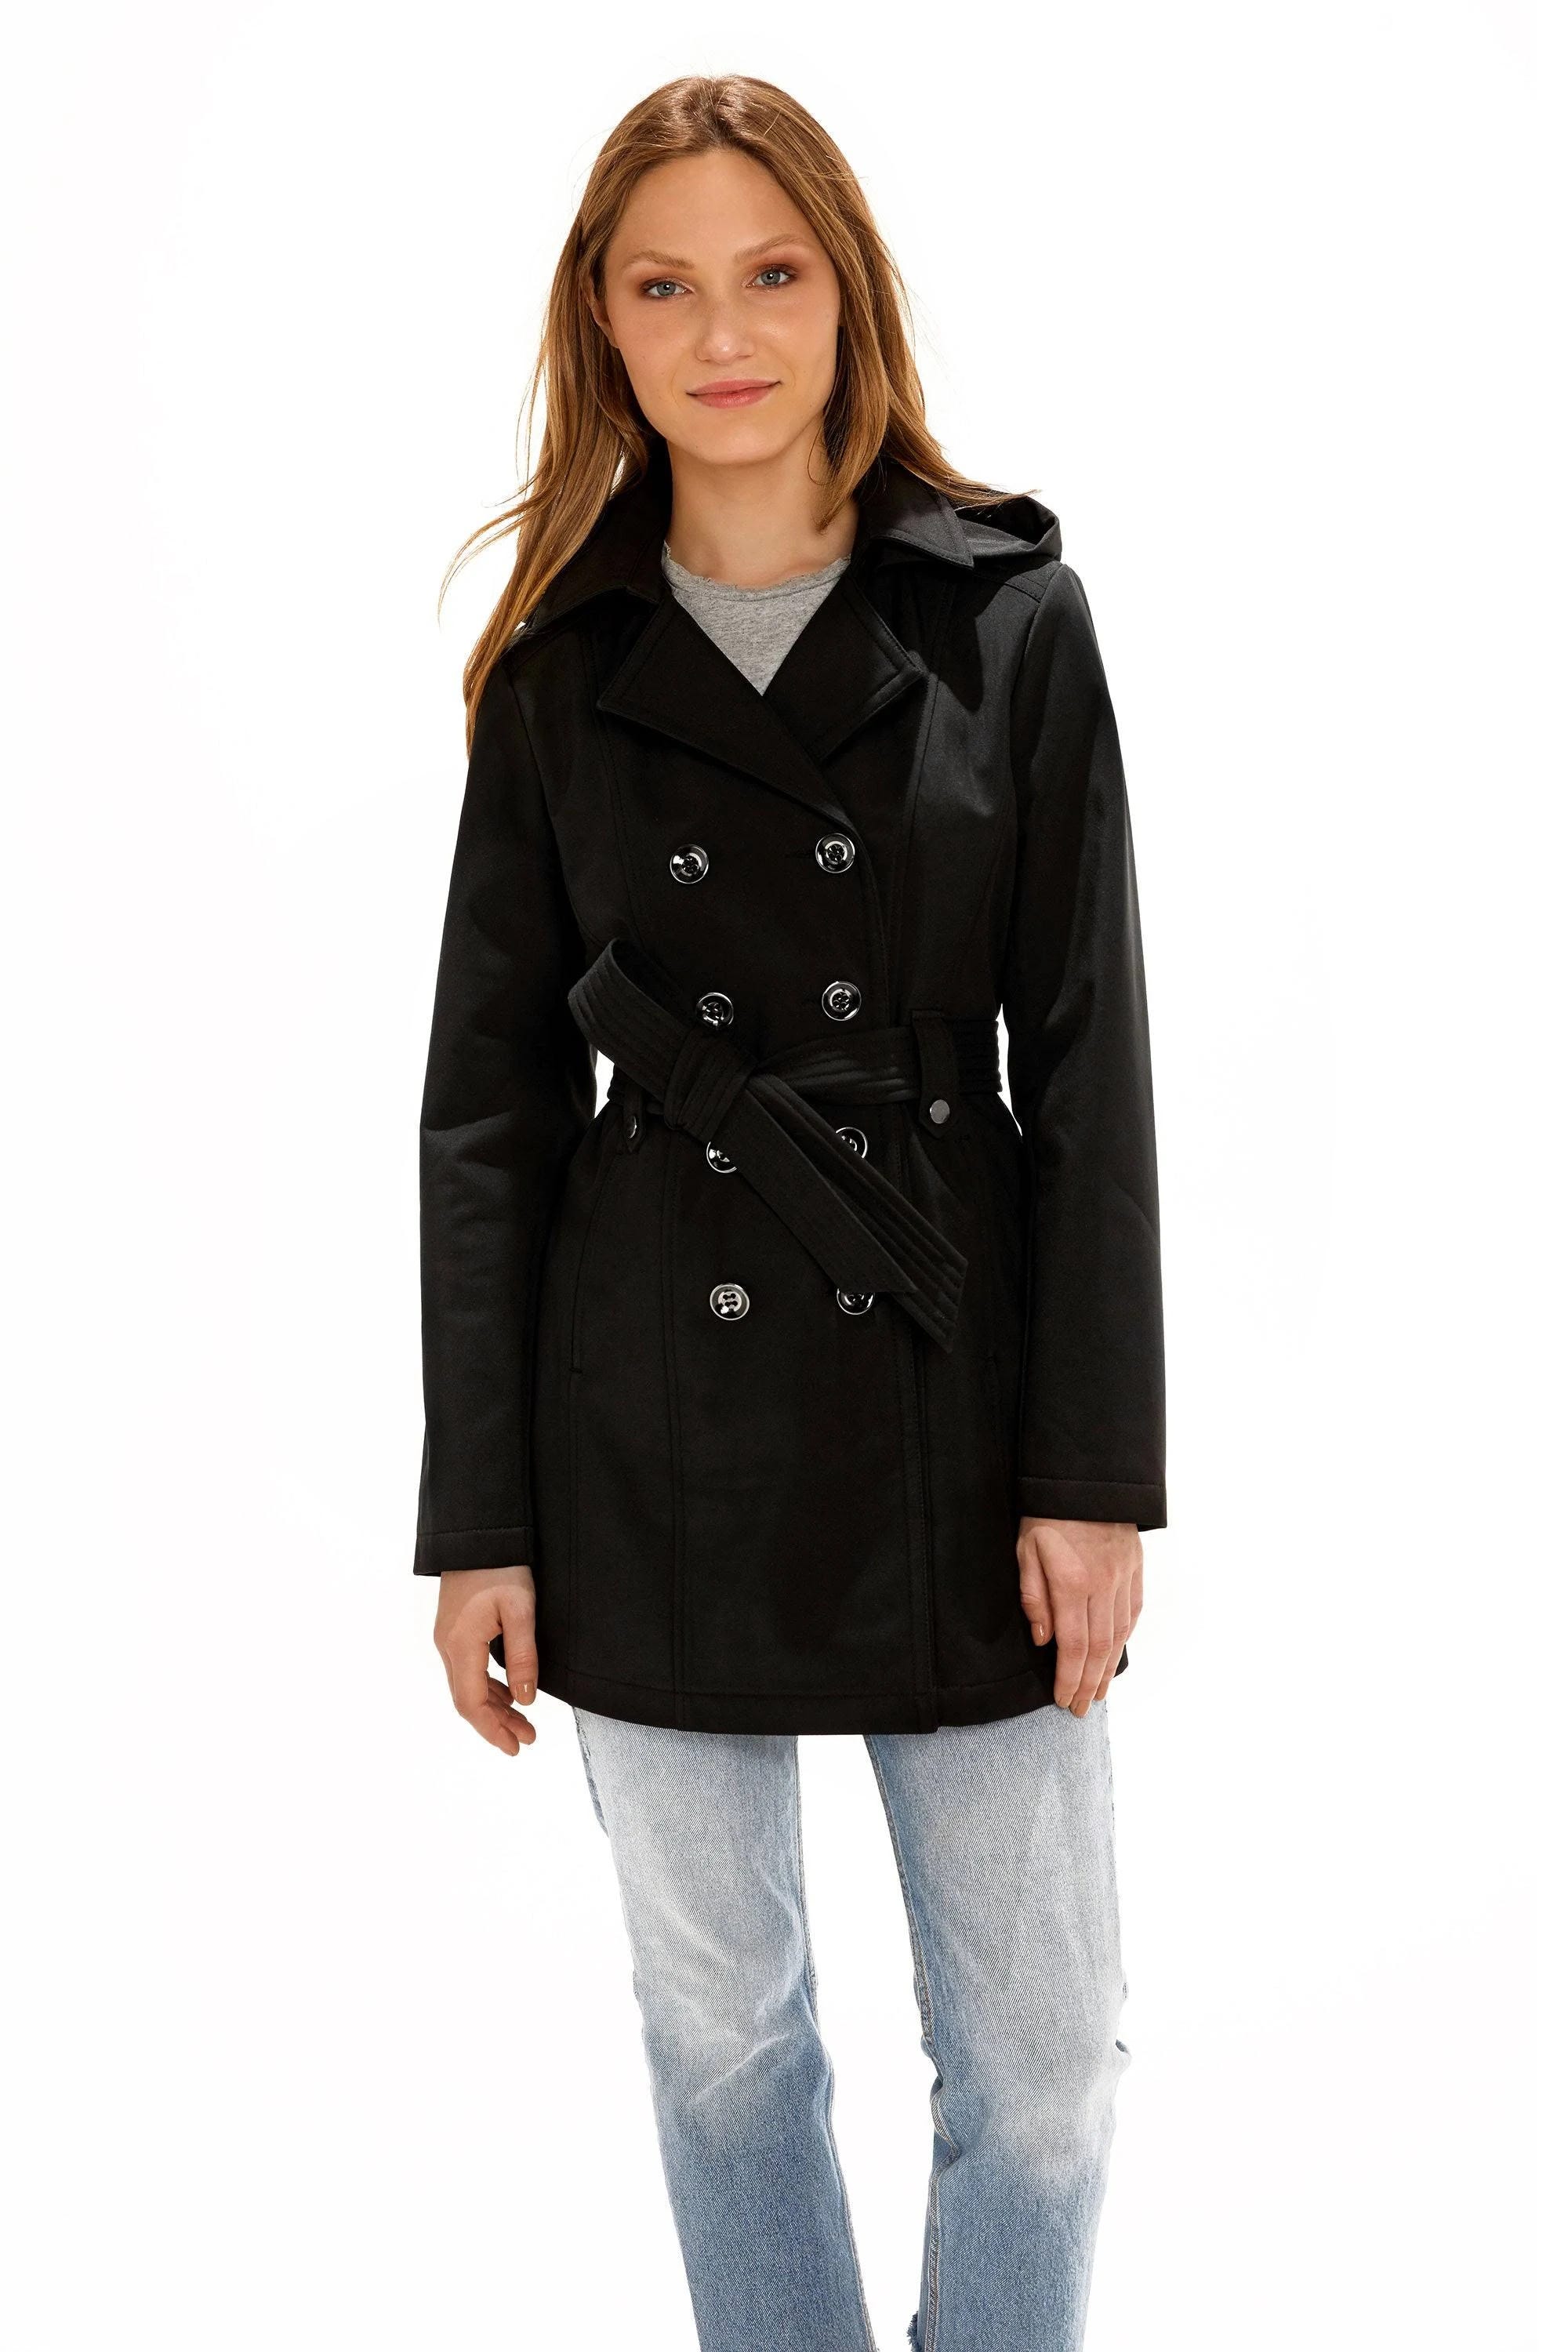 Women's Water-Resistant Trench Coat for Rainy Days | Image